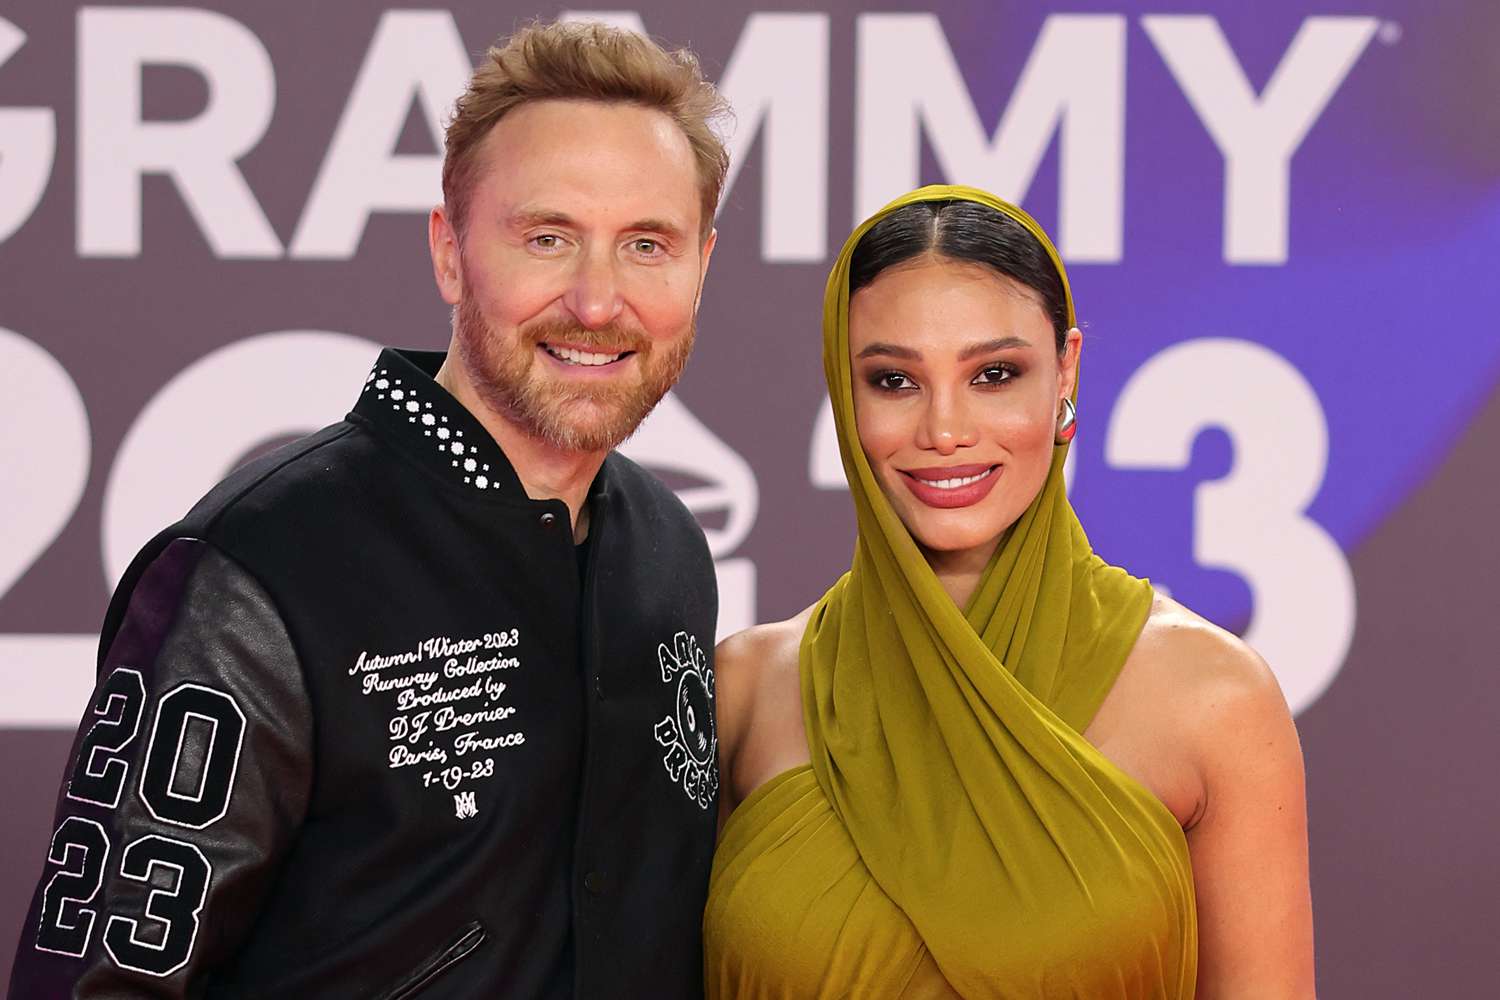 David Guetta and Jessica Ledon attend The 24th Annual Latin Grammy Awards on November 16, 2023 